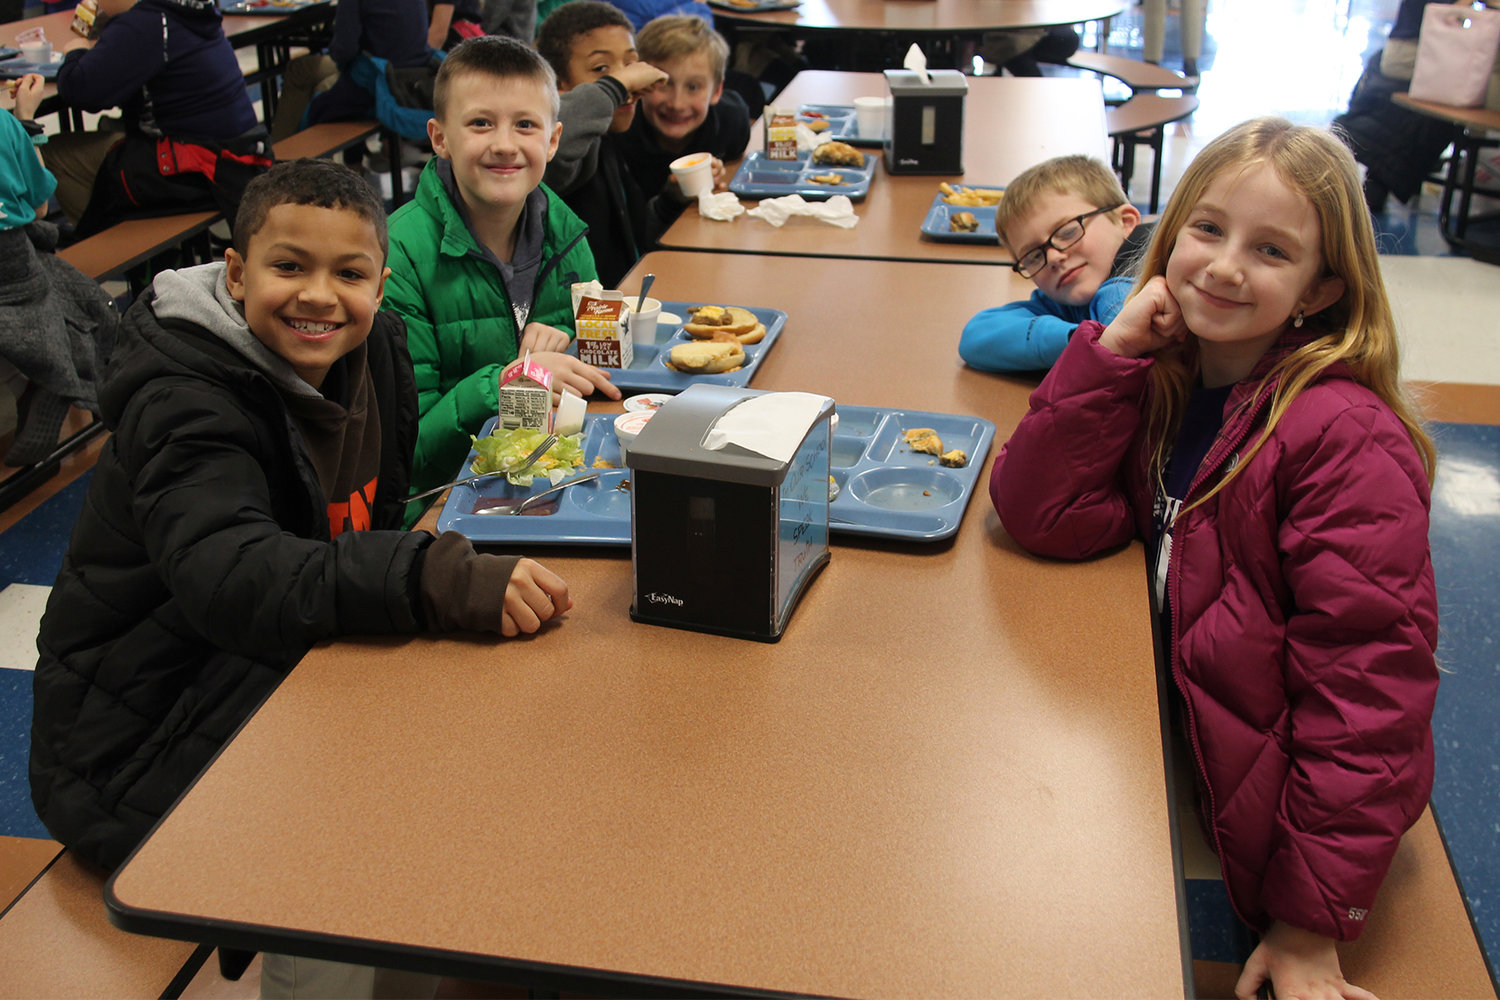 Students at St. Peter Interparish School in Jefferson City “mix it up” with random seating arrangements on the Friday of the school’s observance of Random Acts of Kindness Week.